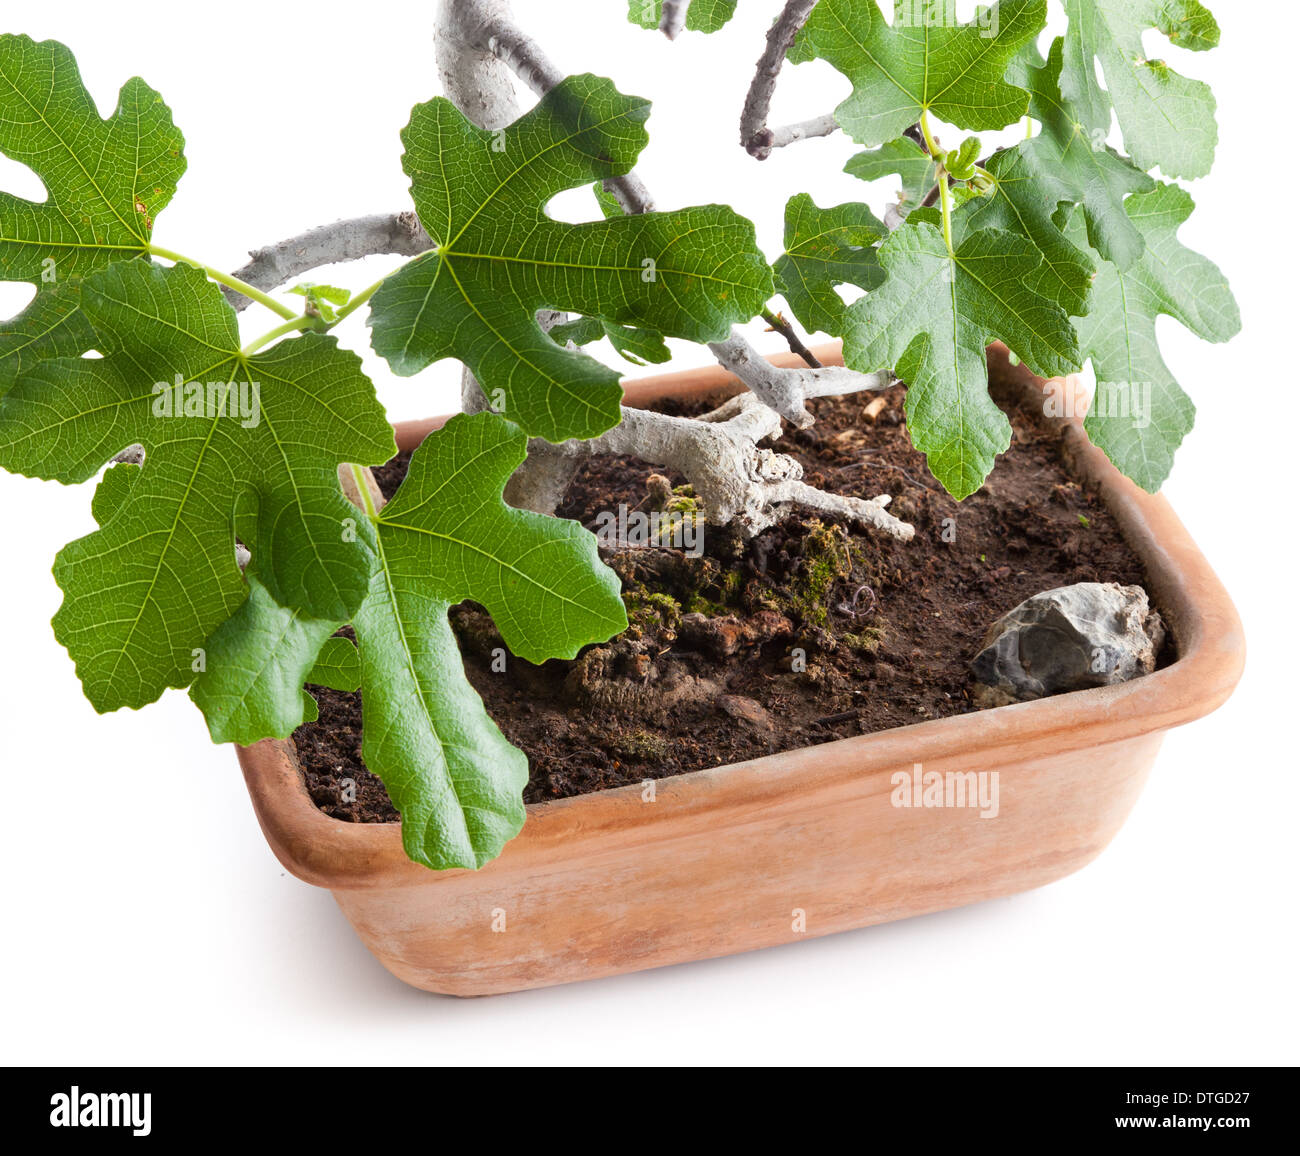 Bonsai fig tree photographed in the studio on white background Stock Photo